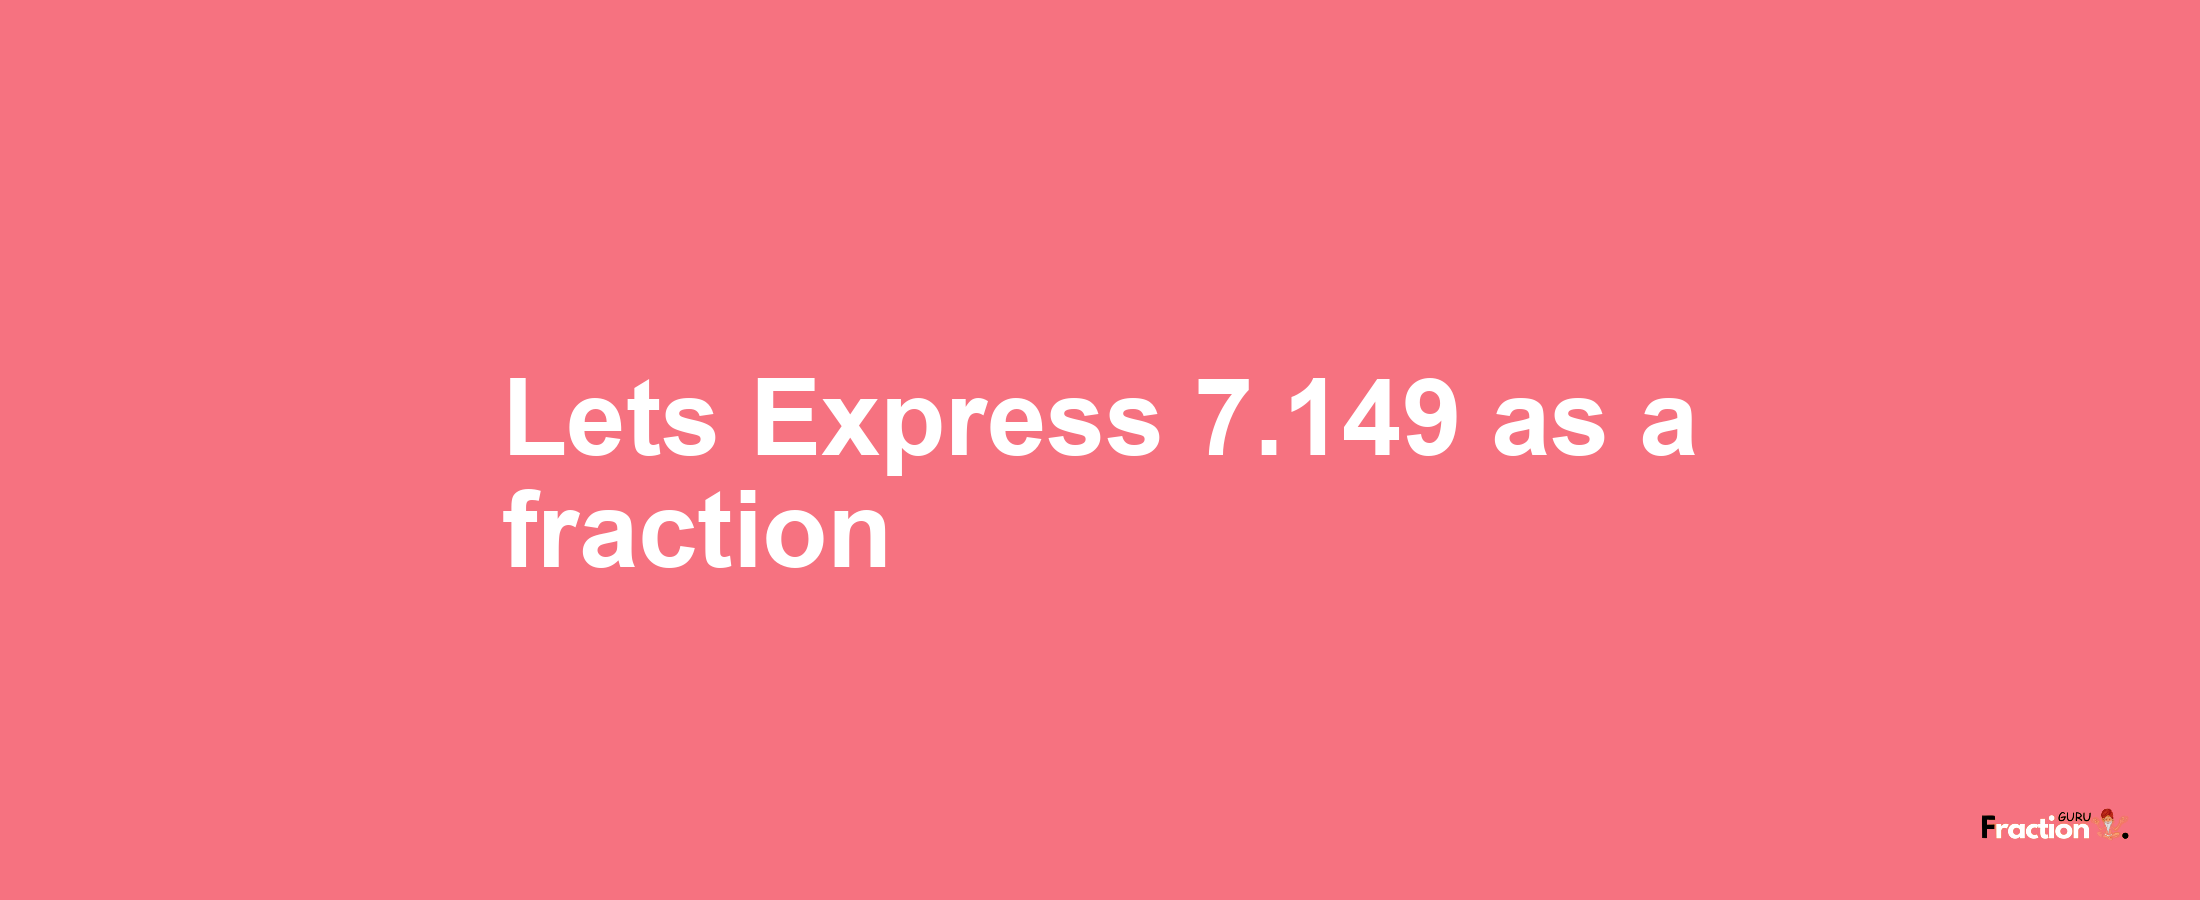 Lets Express 7.149 as afraction